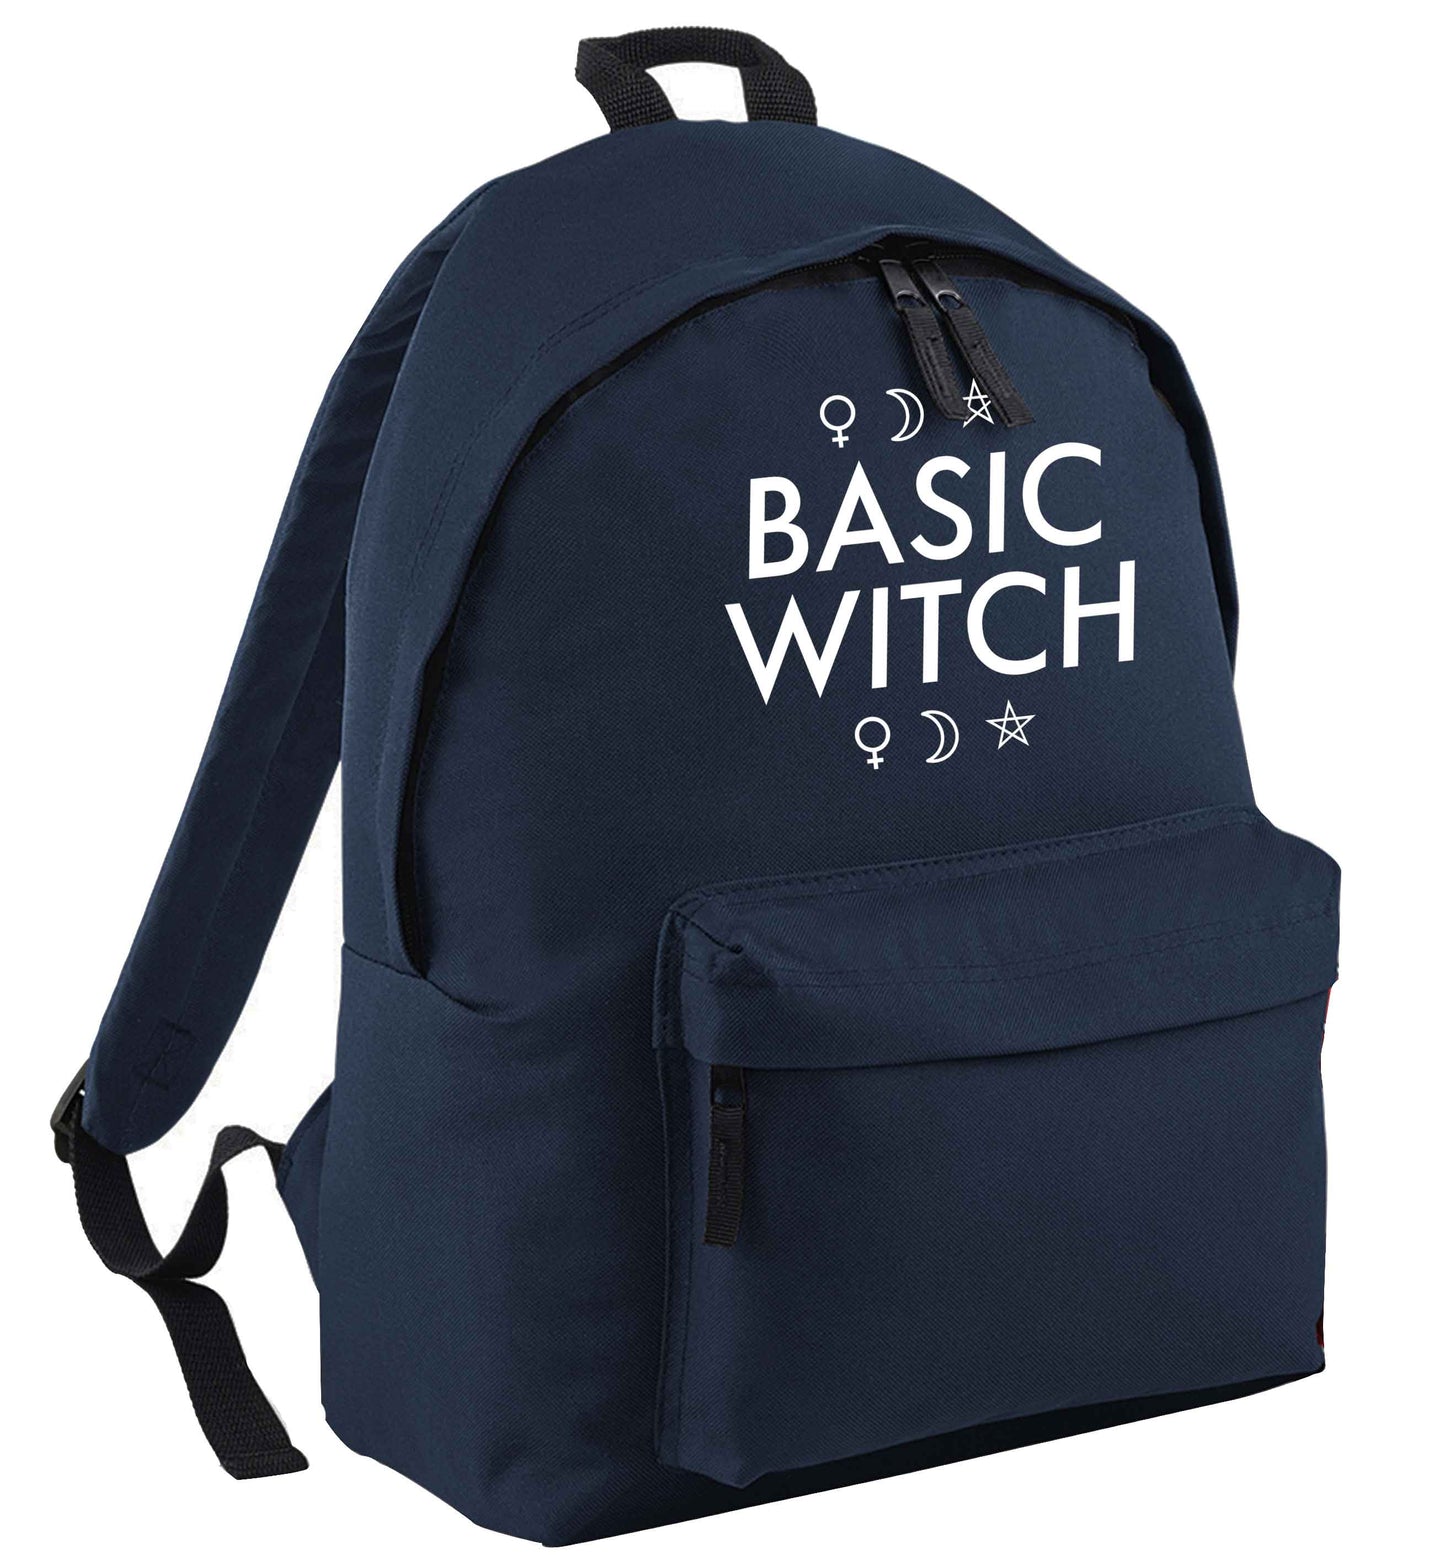 Basic witch 1 | Children's backpack